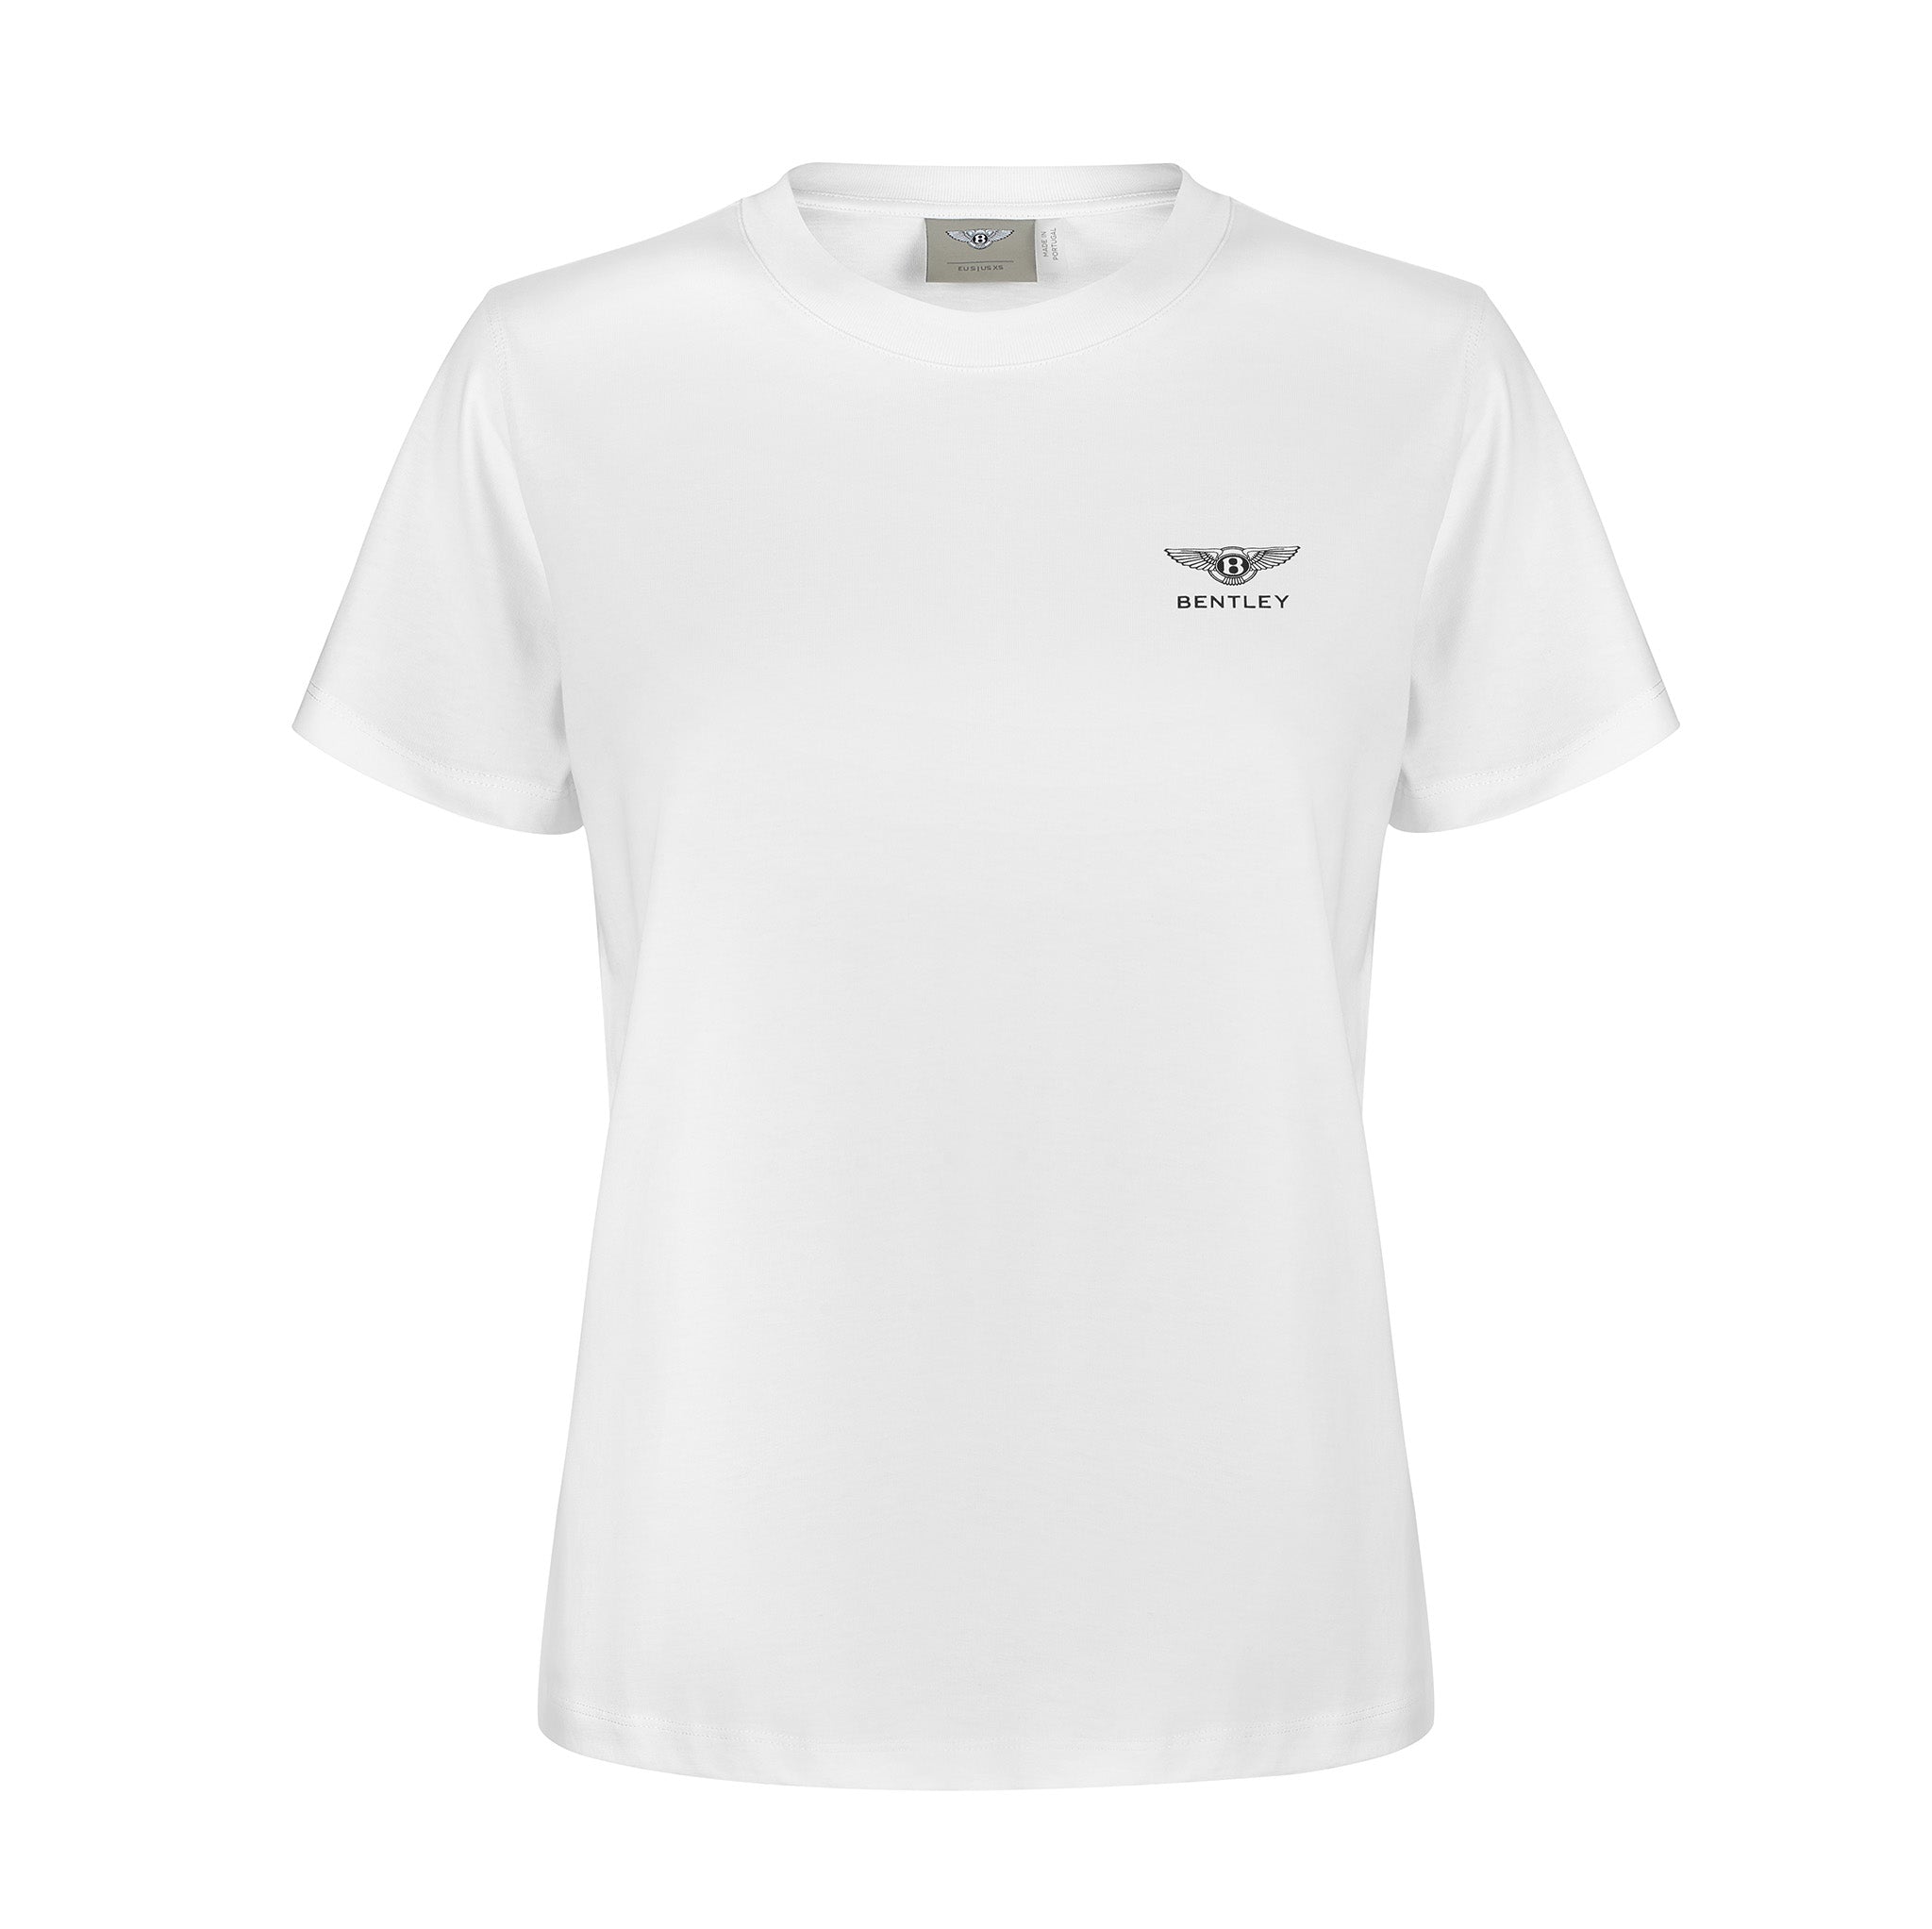 Ladies' Signature T-Shirt – The Bentley Collection